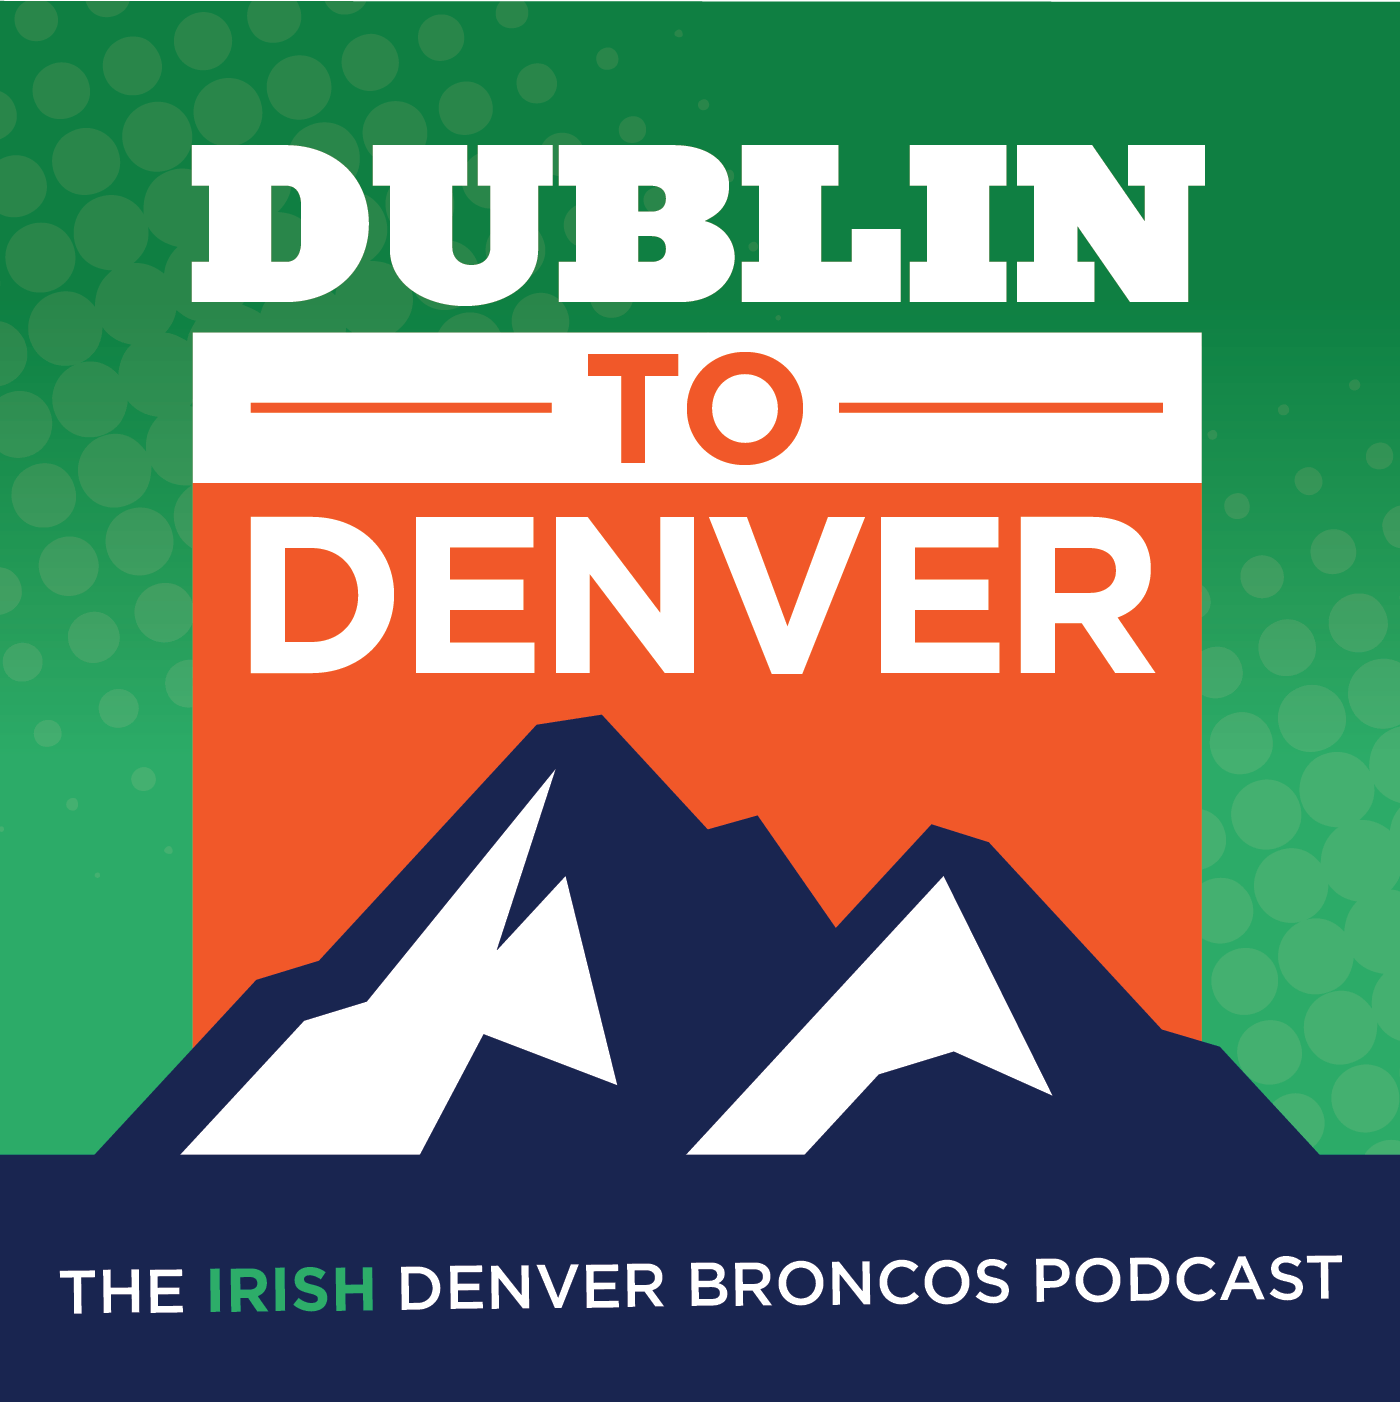 Dublin to Denver - Here's how the first seven games might go for the Broncos this year